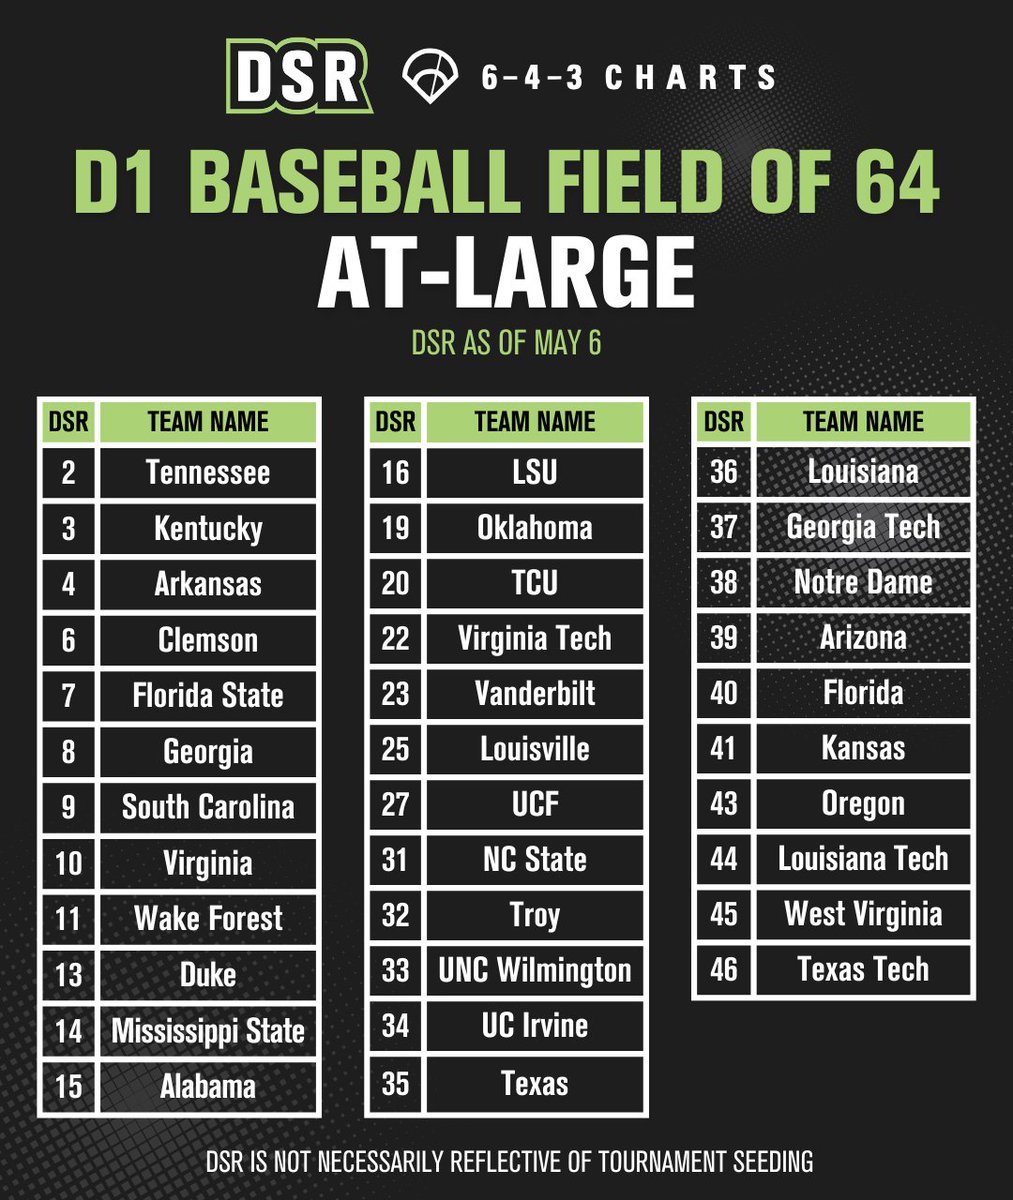 THE DSR FIELD OF 64 ⚾️ - May 9 After the 30 automatic bids were in place (see thread 👆), the 34 at-large teams in the Field of 64 were selected from the remaining highest DSR teams. (3/6)